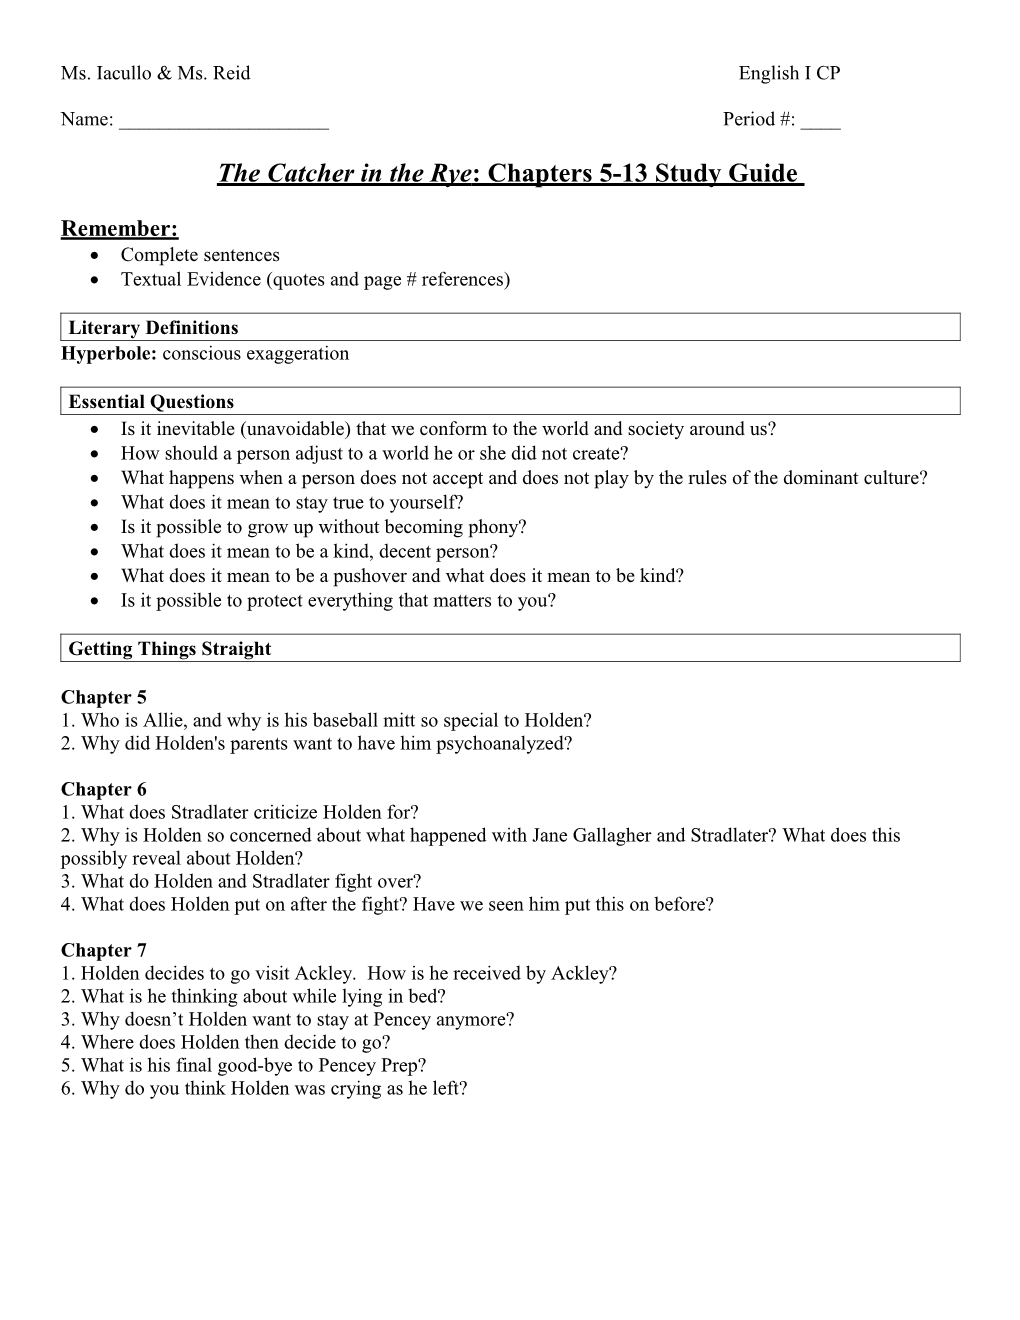 The Catcher in the Rye: Chapters 5-13 Study Guide